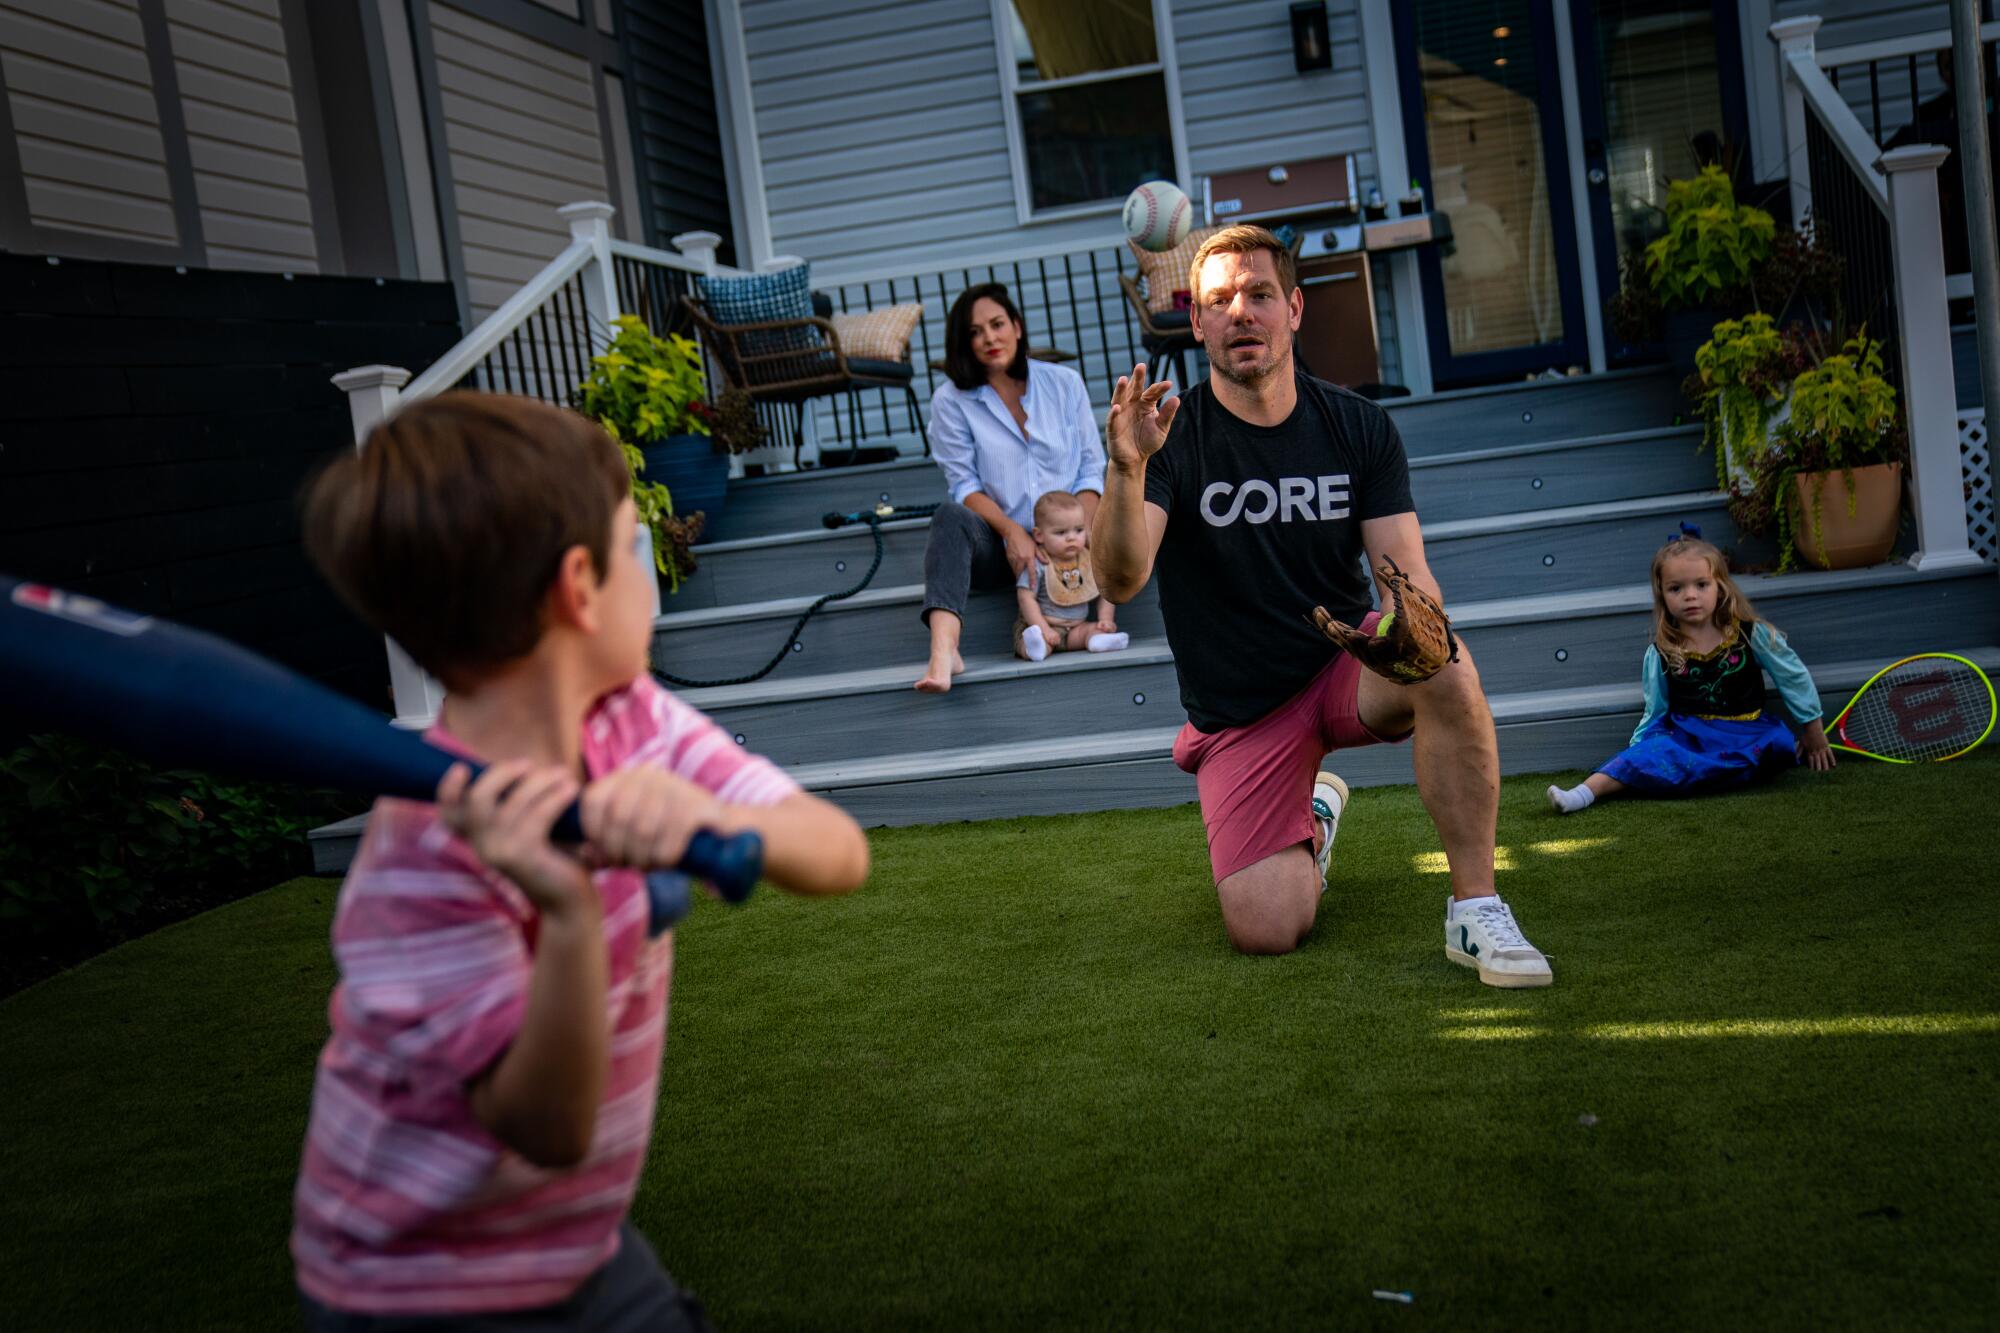 Rep. Eric Swalwell tosses a ball to one of his children in the family's yard.